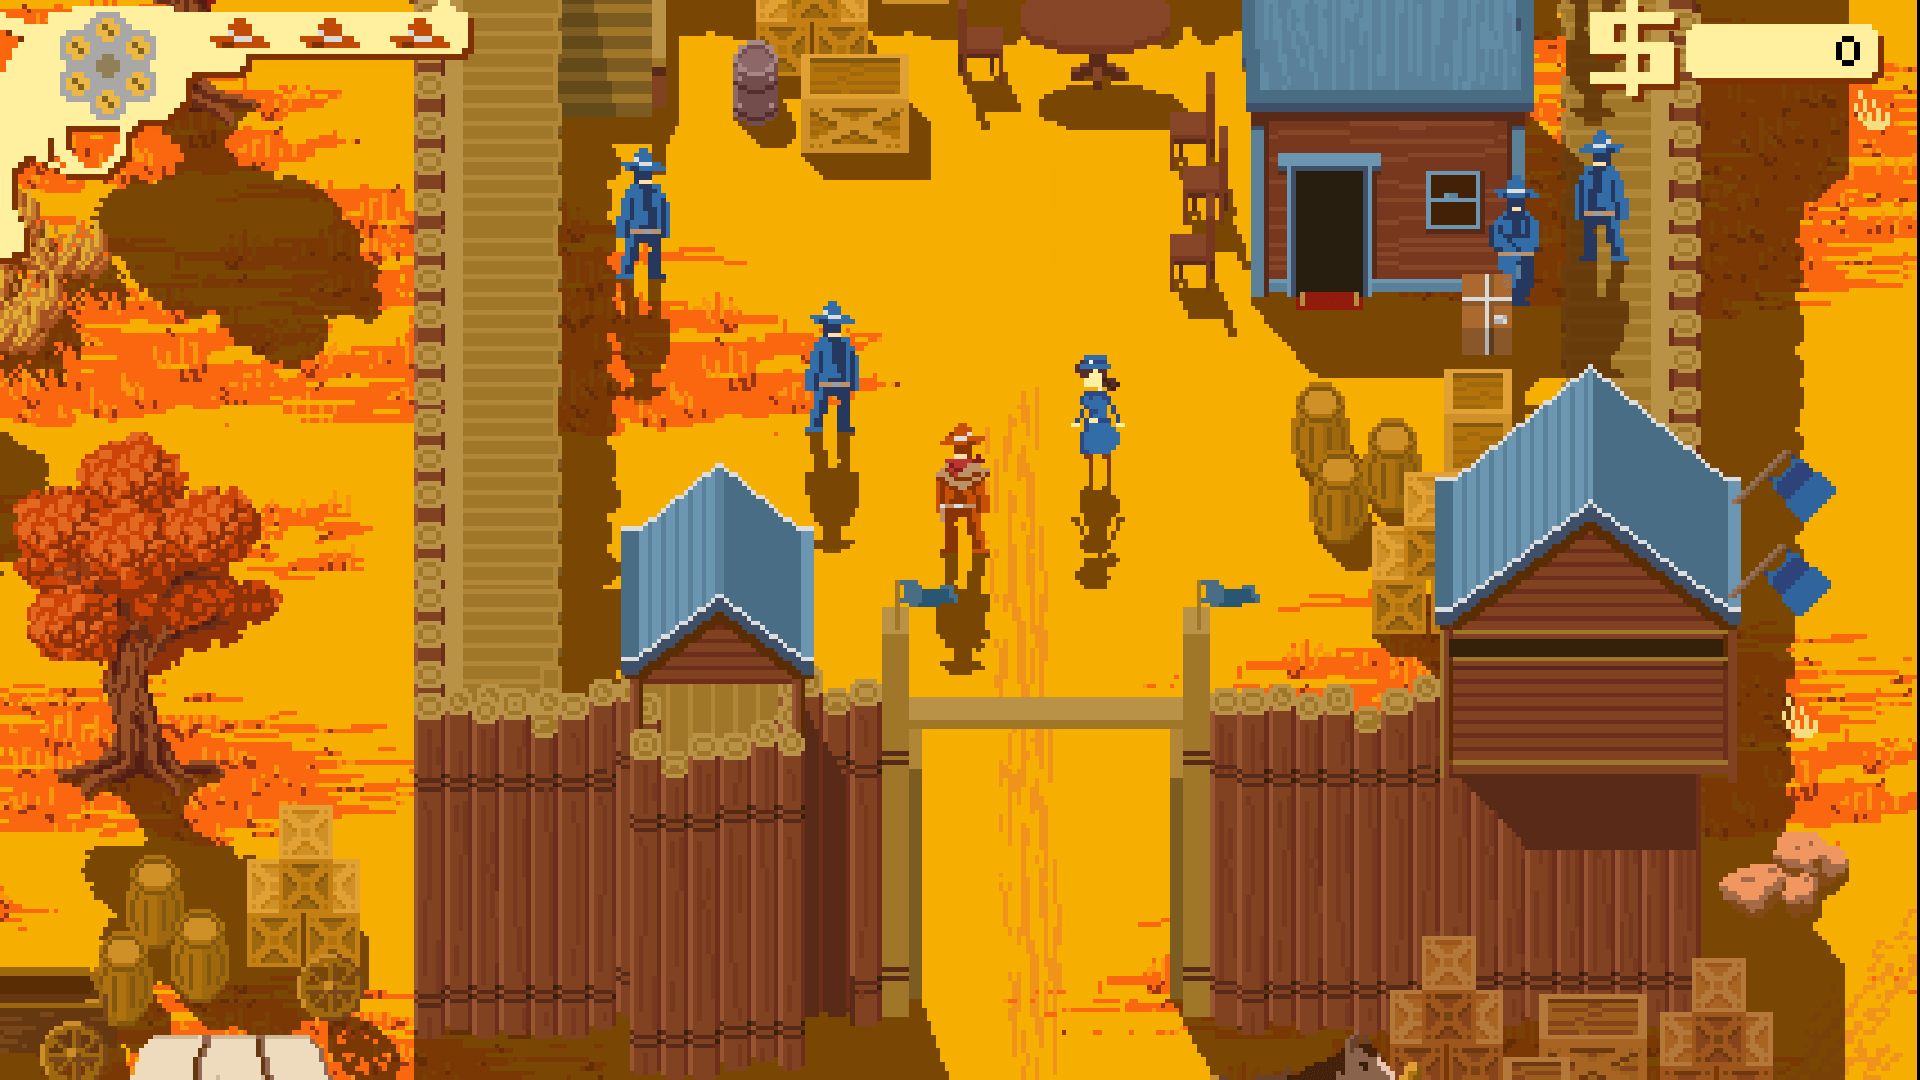 10 Cowboy Themed Indie Games For Cowboy Day